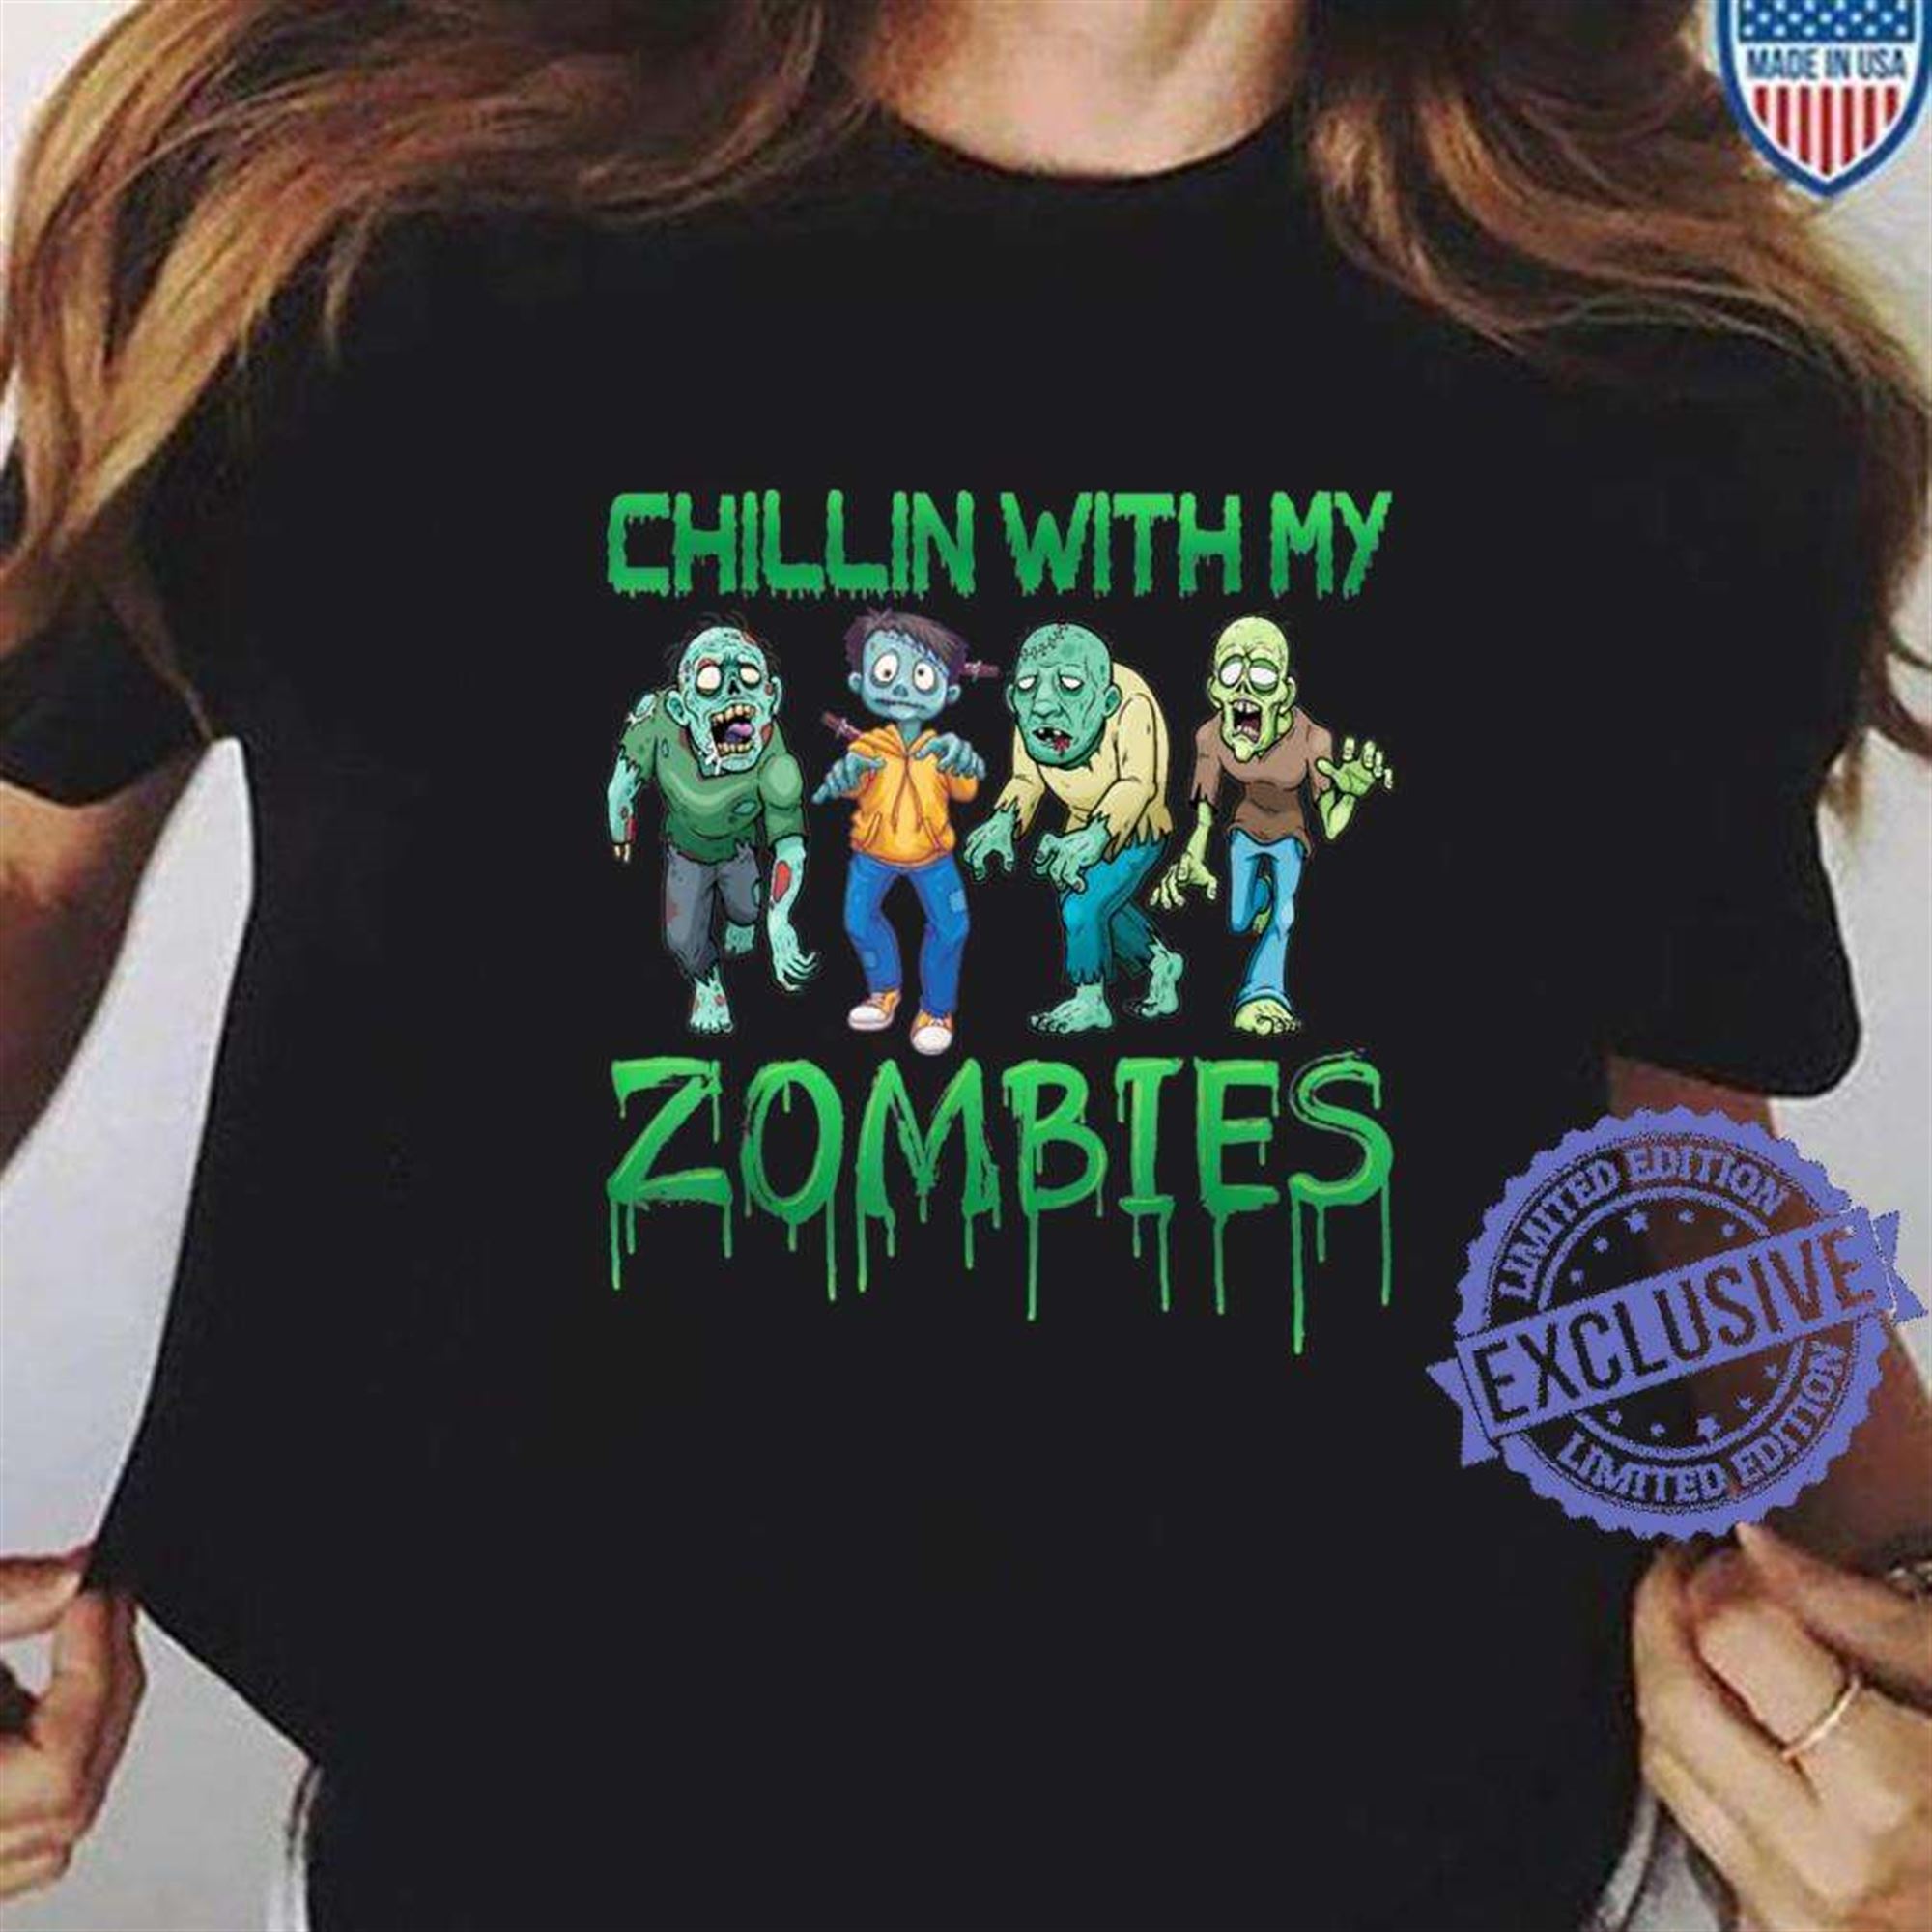 Chilling With My Zombie Halloween Costume Outfit T-shirt Full Size Up To 5xl